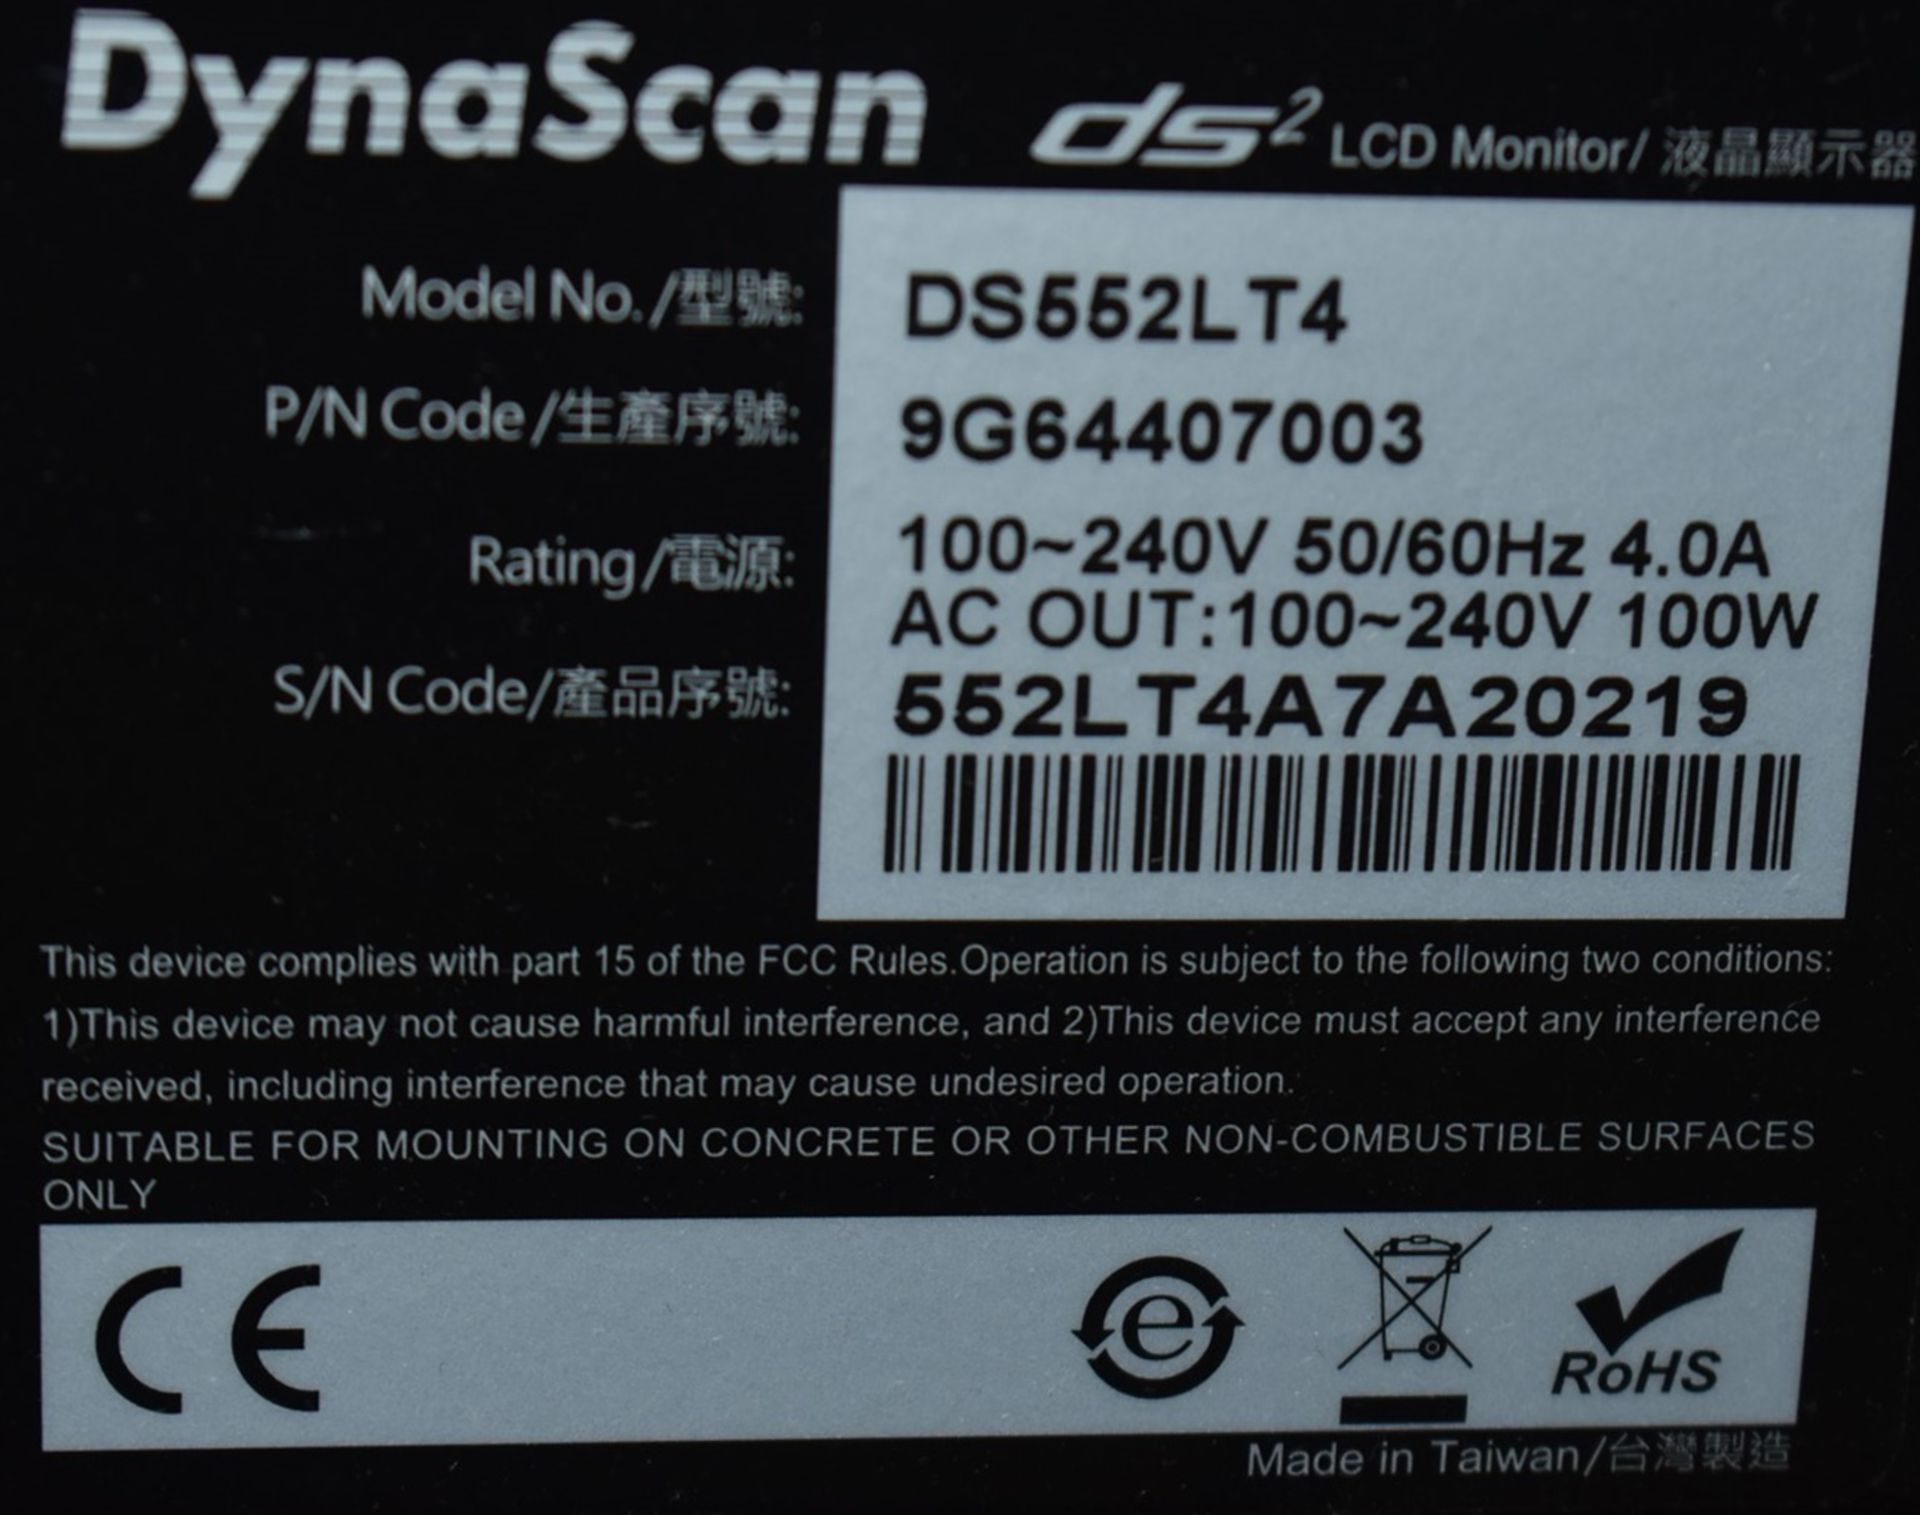 1 x DynaScan ds2 55 Inch LCD Fanless Monitor With Security Metal Enclosure and Signature Book IPC Sy - Image 4 of 10